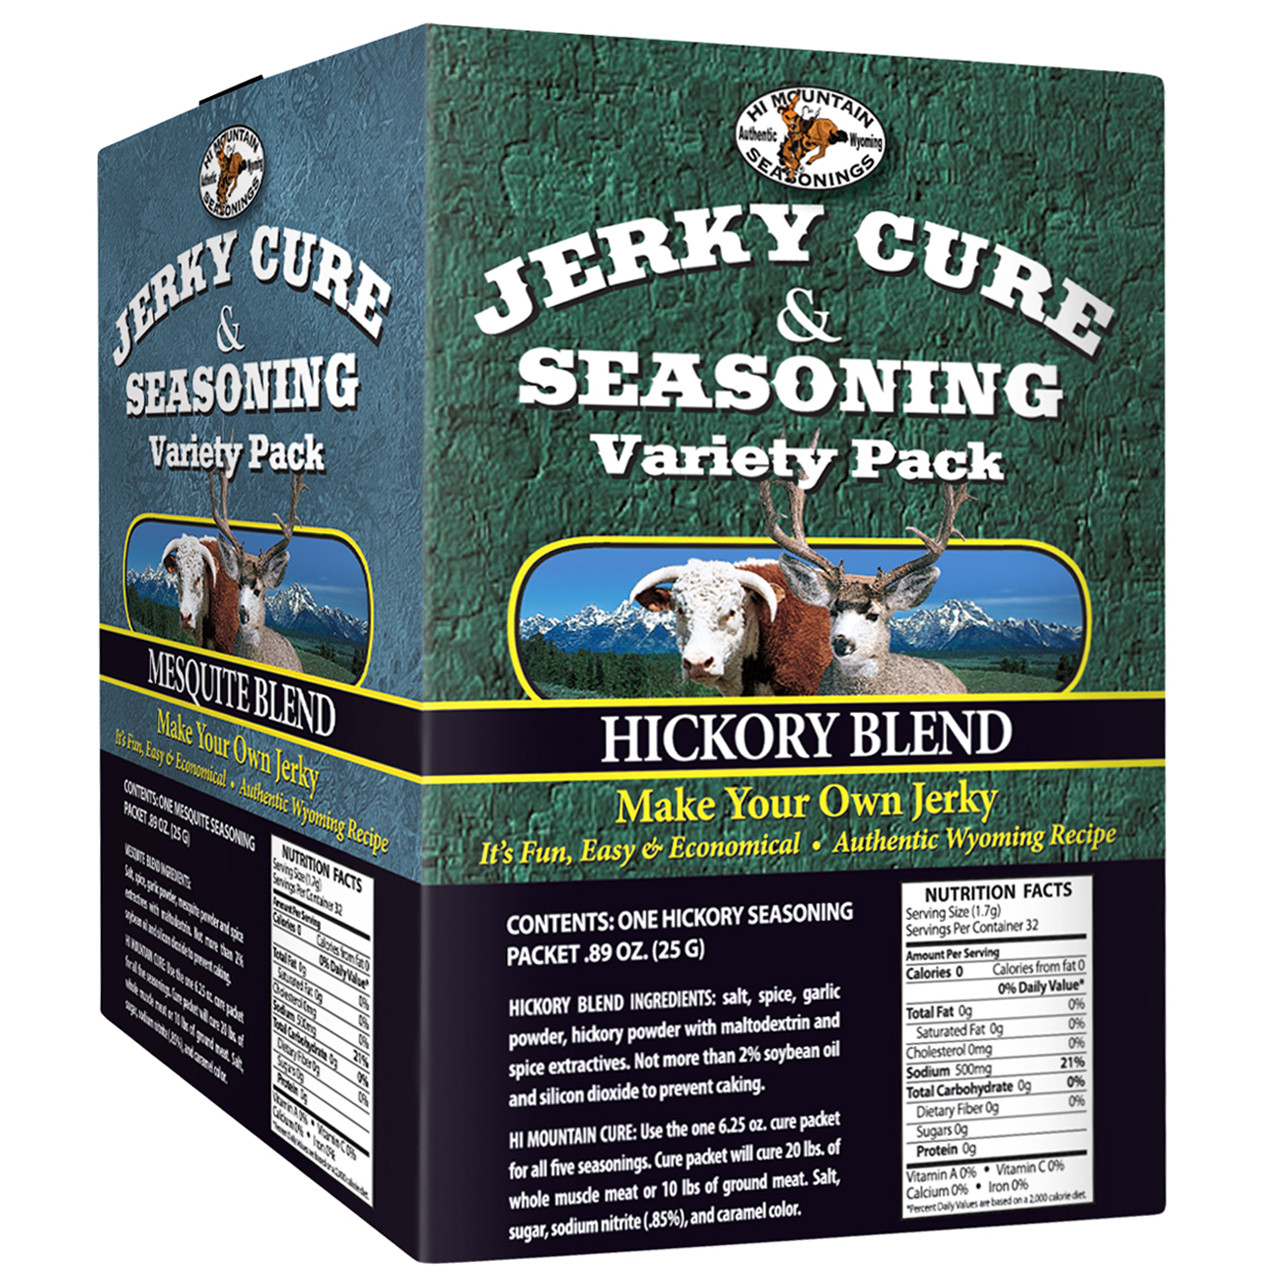 Hi Mountain Jerky Makers Variety Pack #1